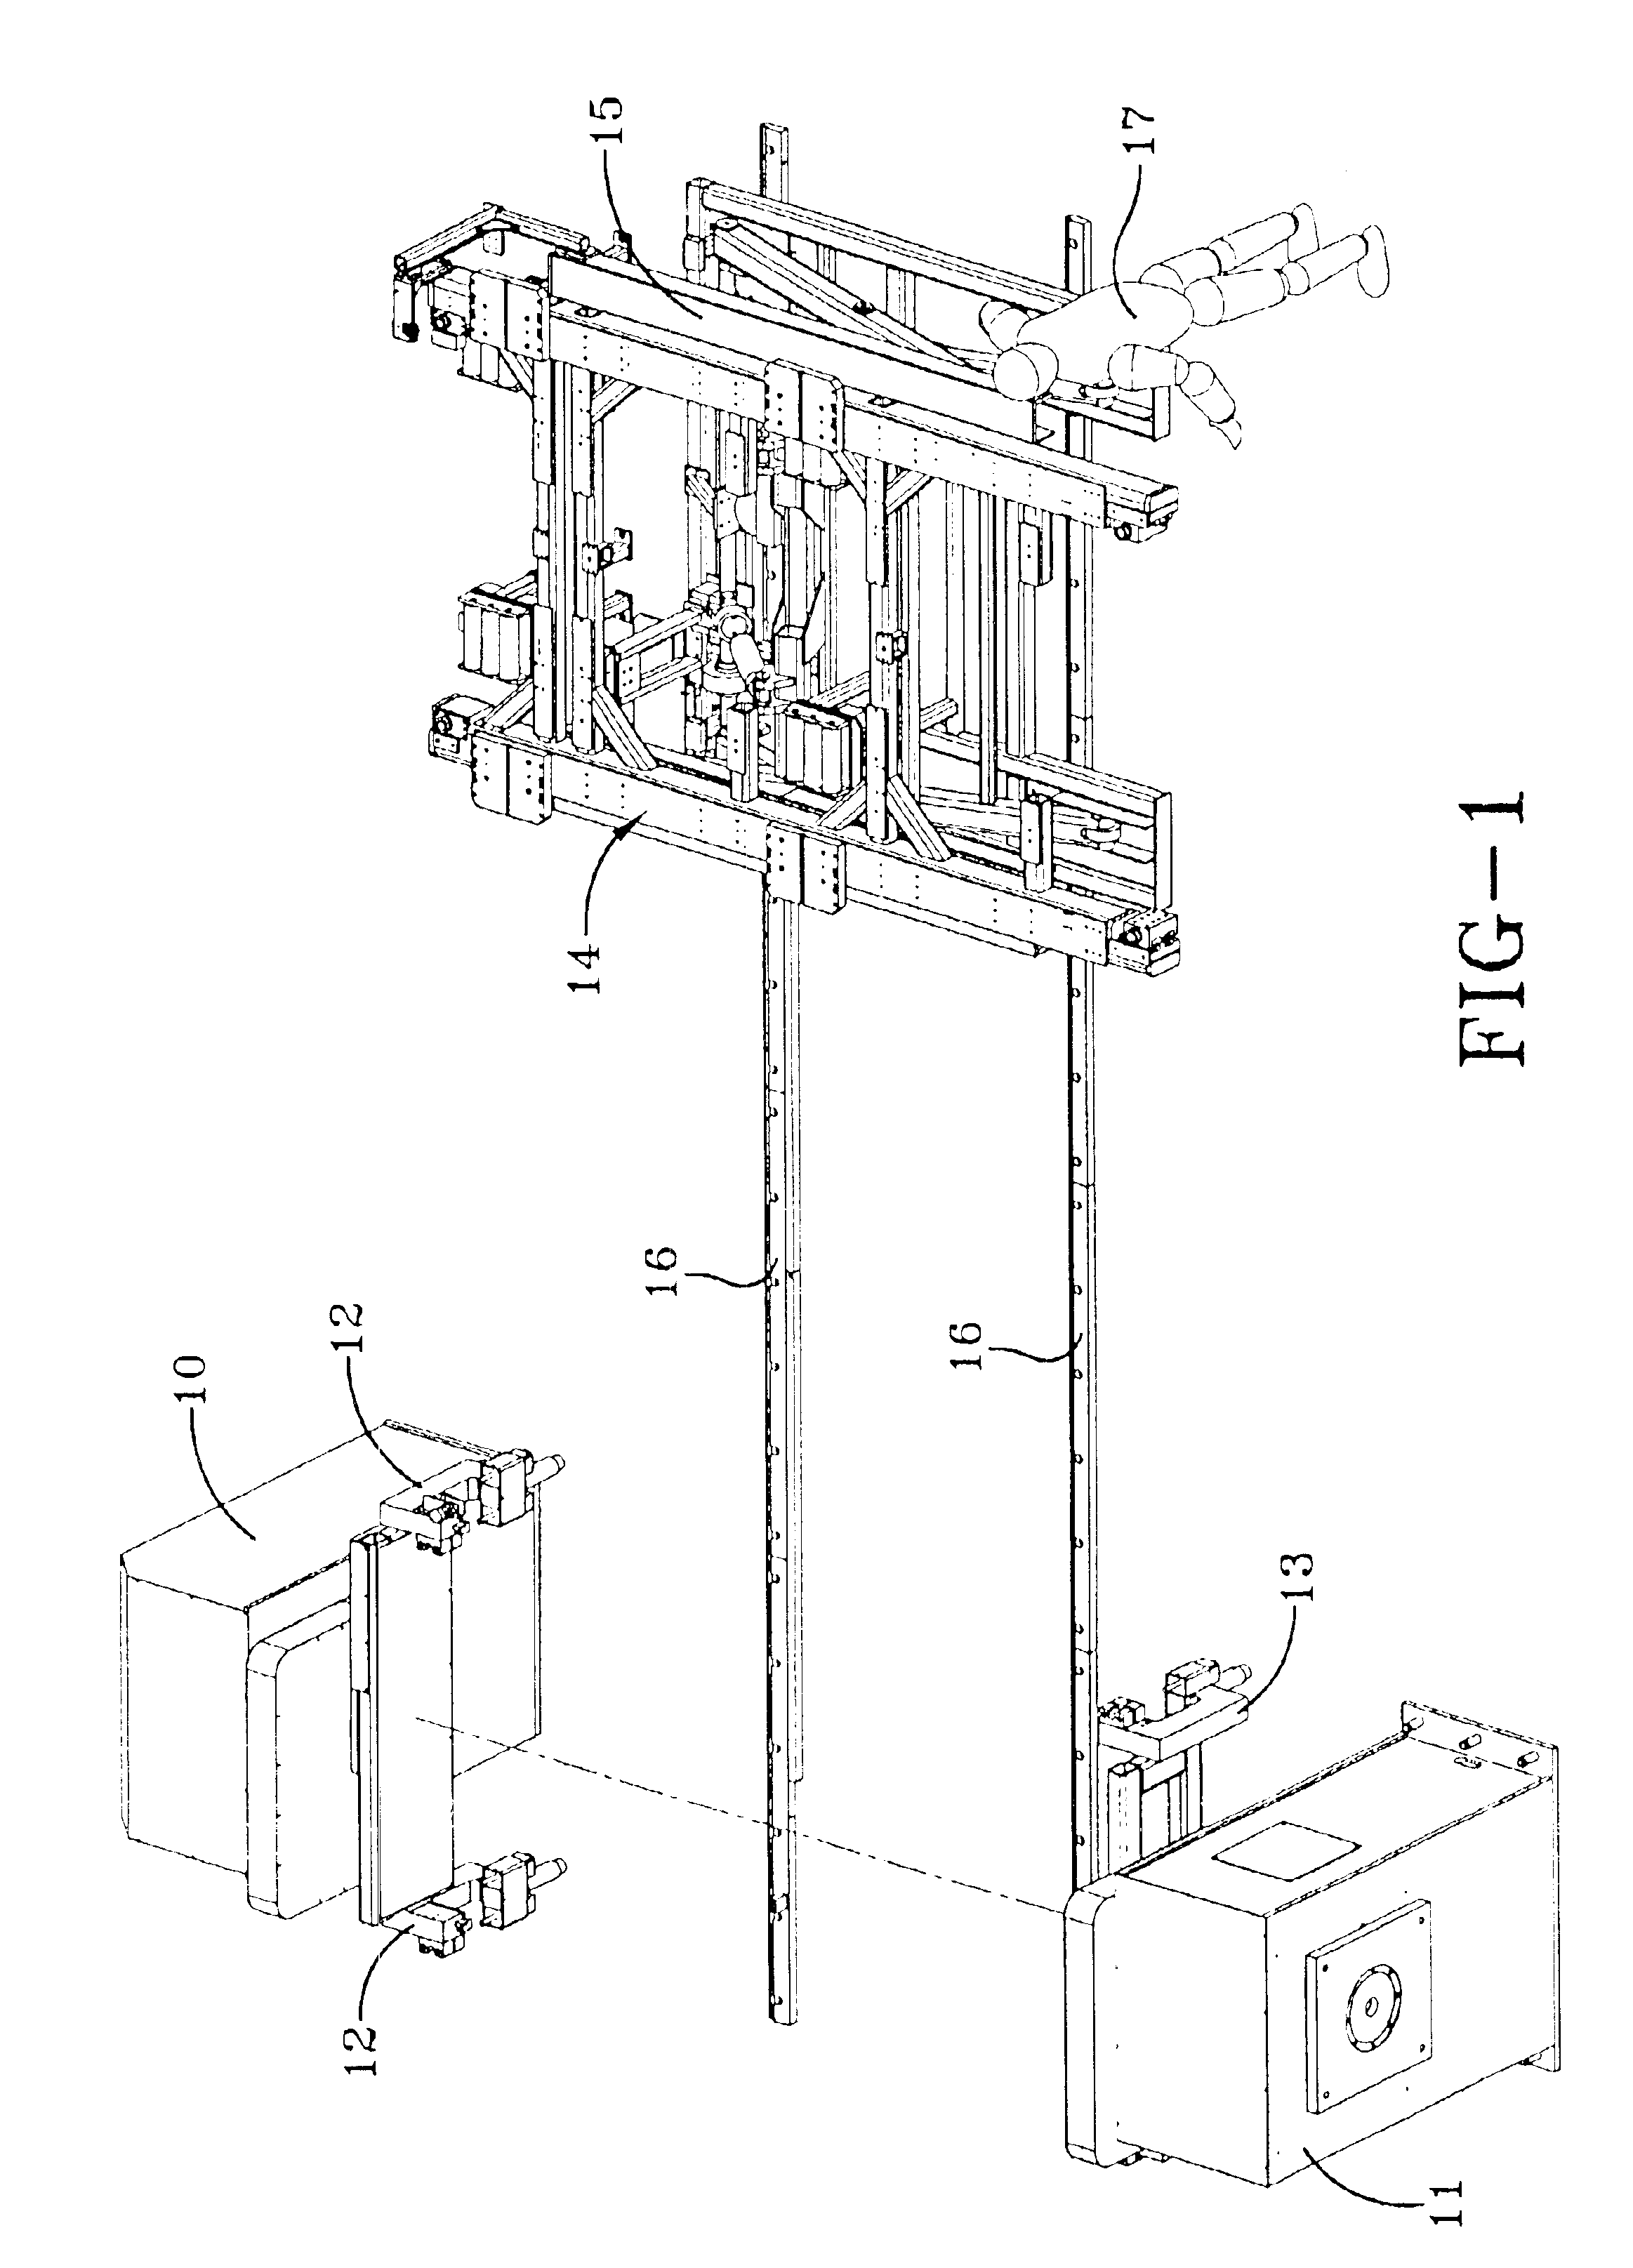 Fixture and method for assembling structures